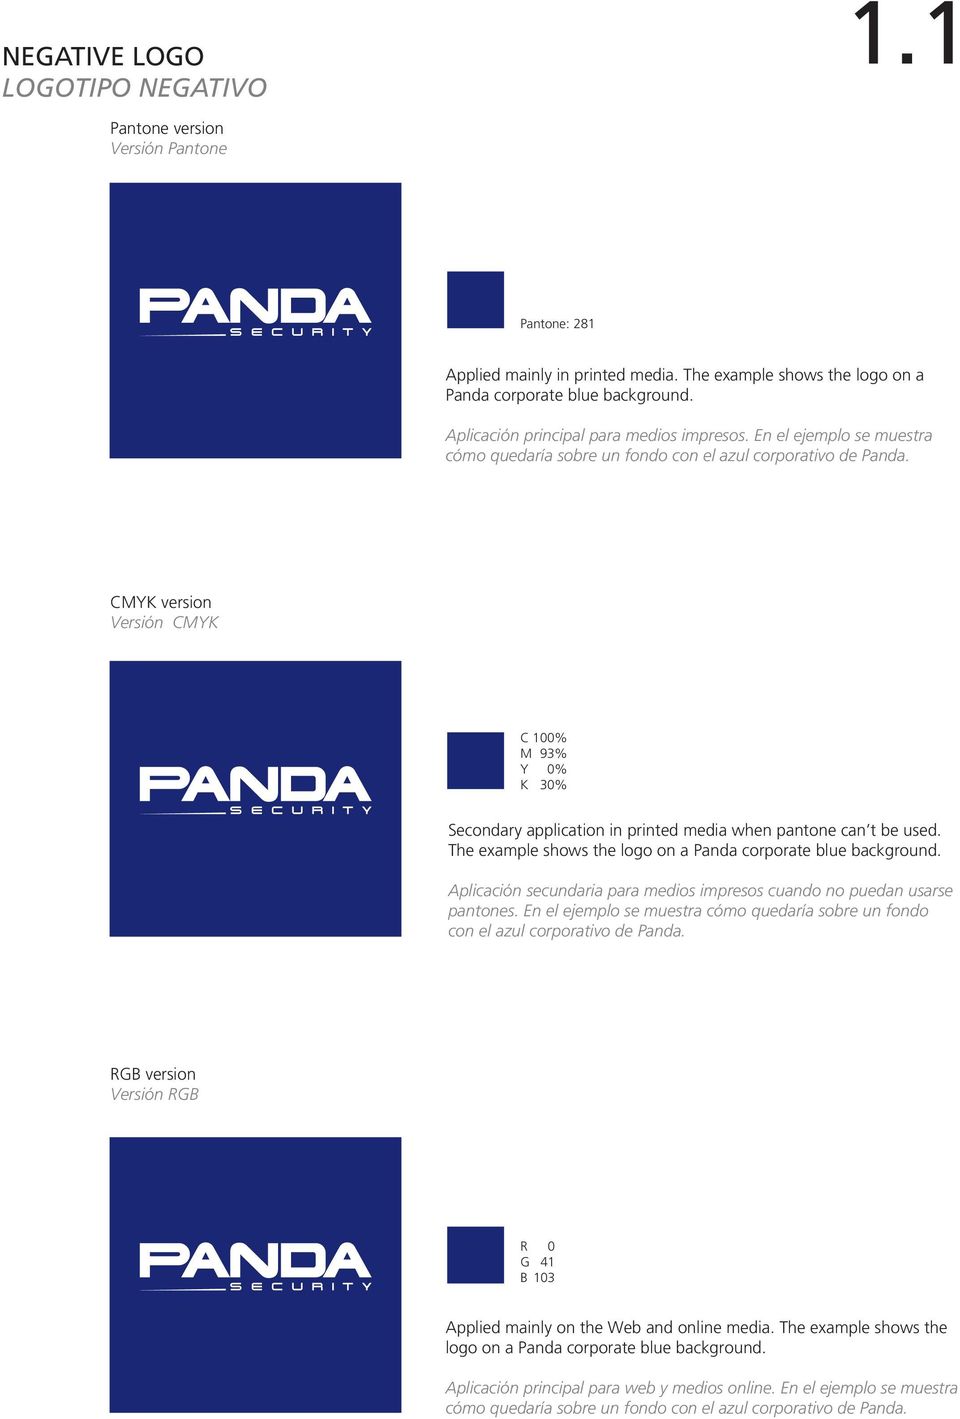 CMYK version Versión CMYK C 100% M 93% Y 0% K 30% Secondary application in printed media when pantone can t be used. The example shows the logo on a Panda corporate blue background.